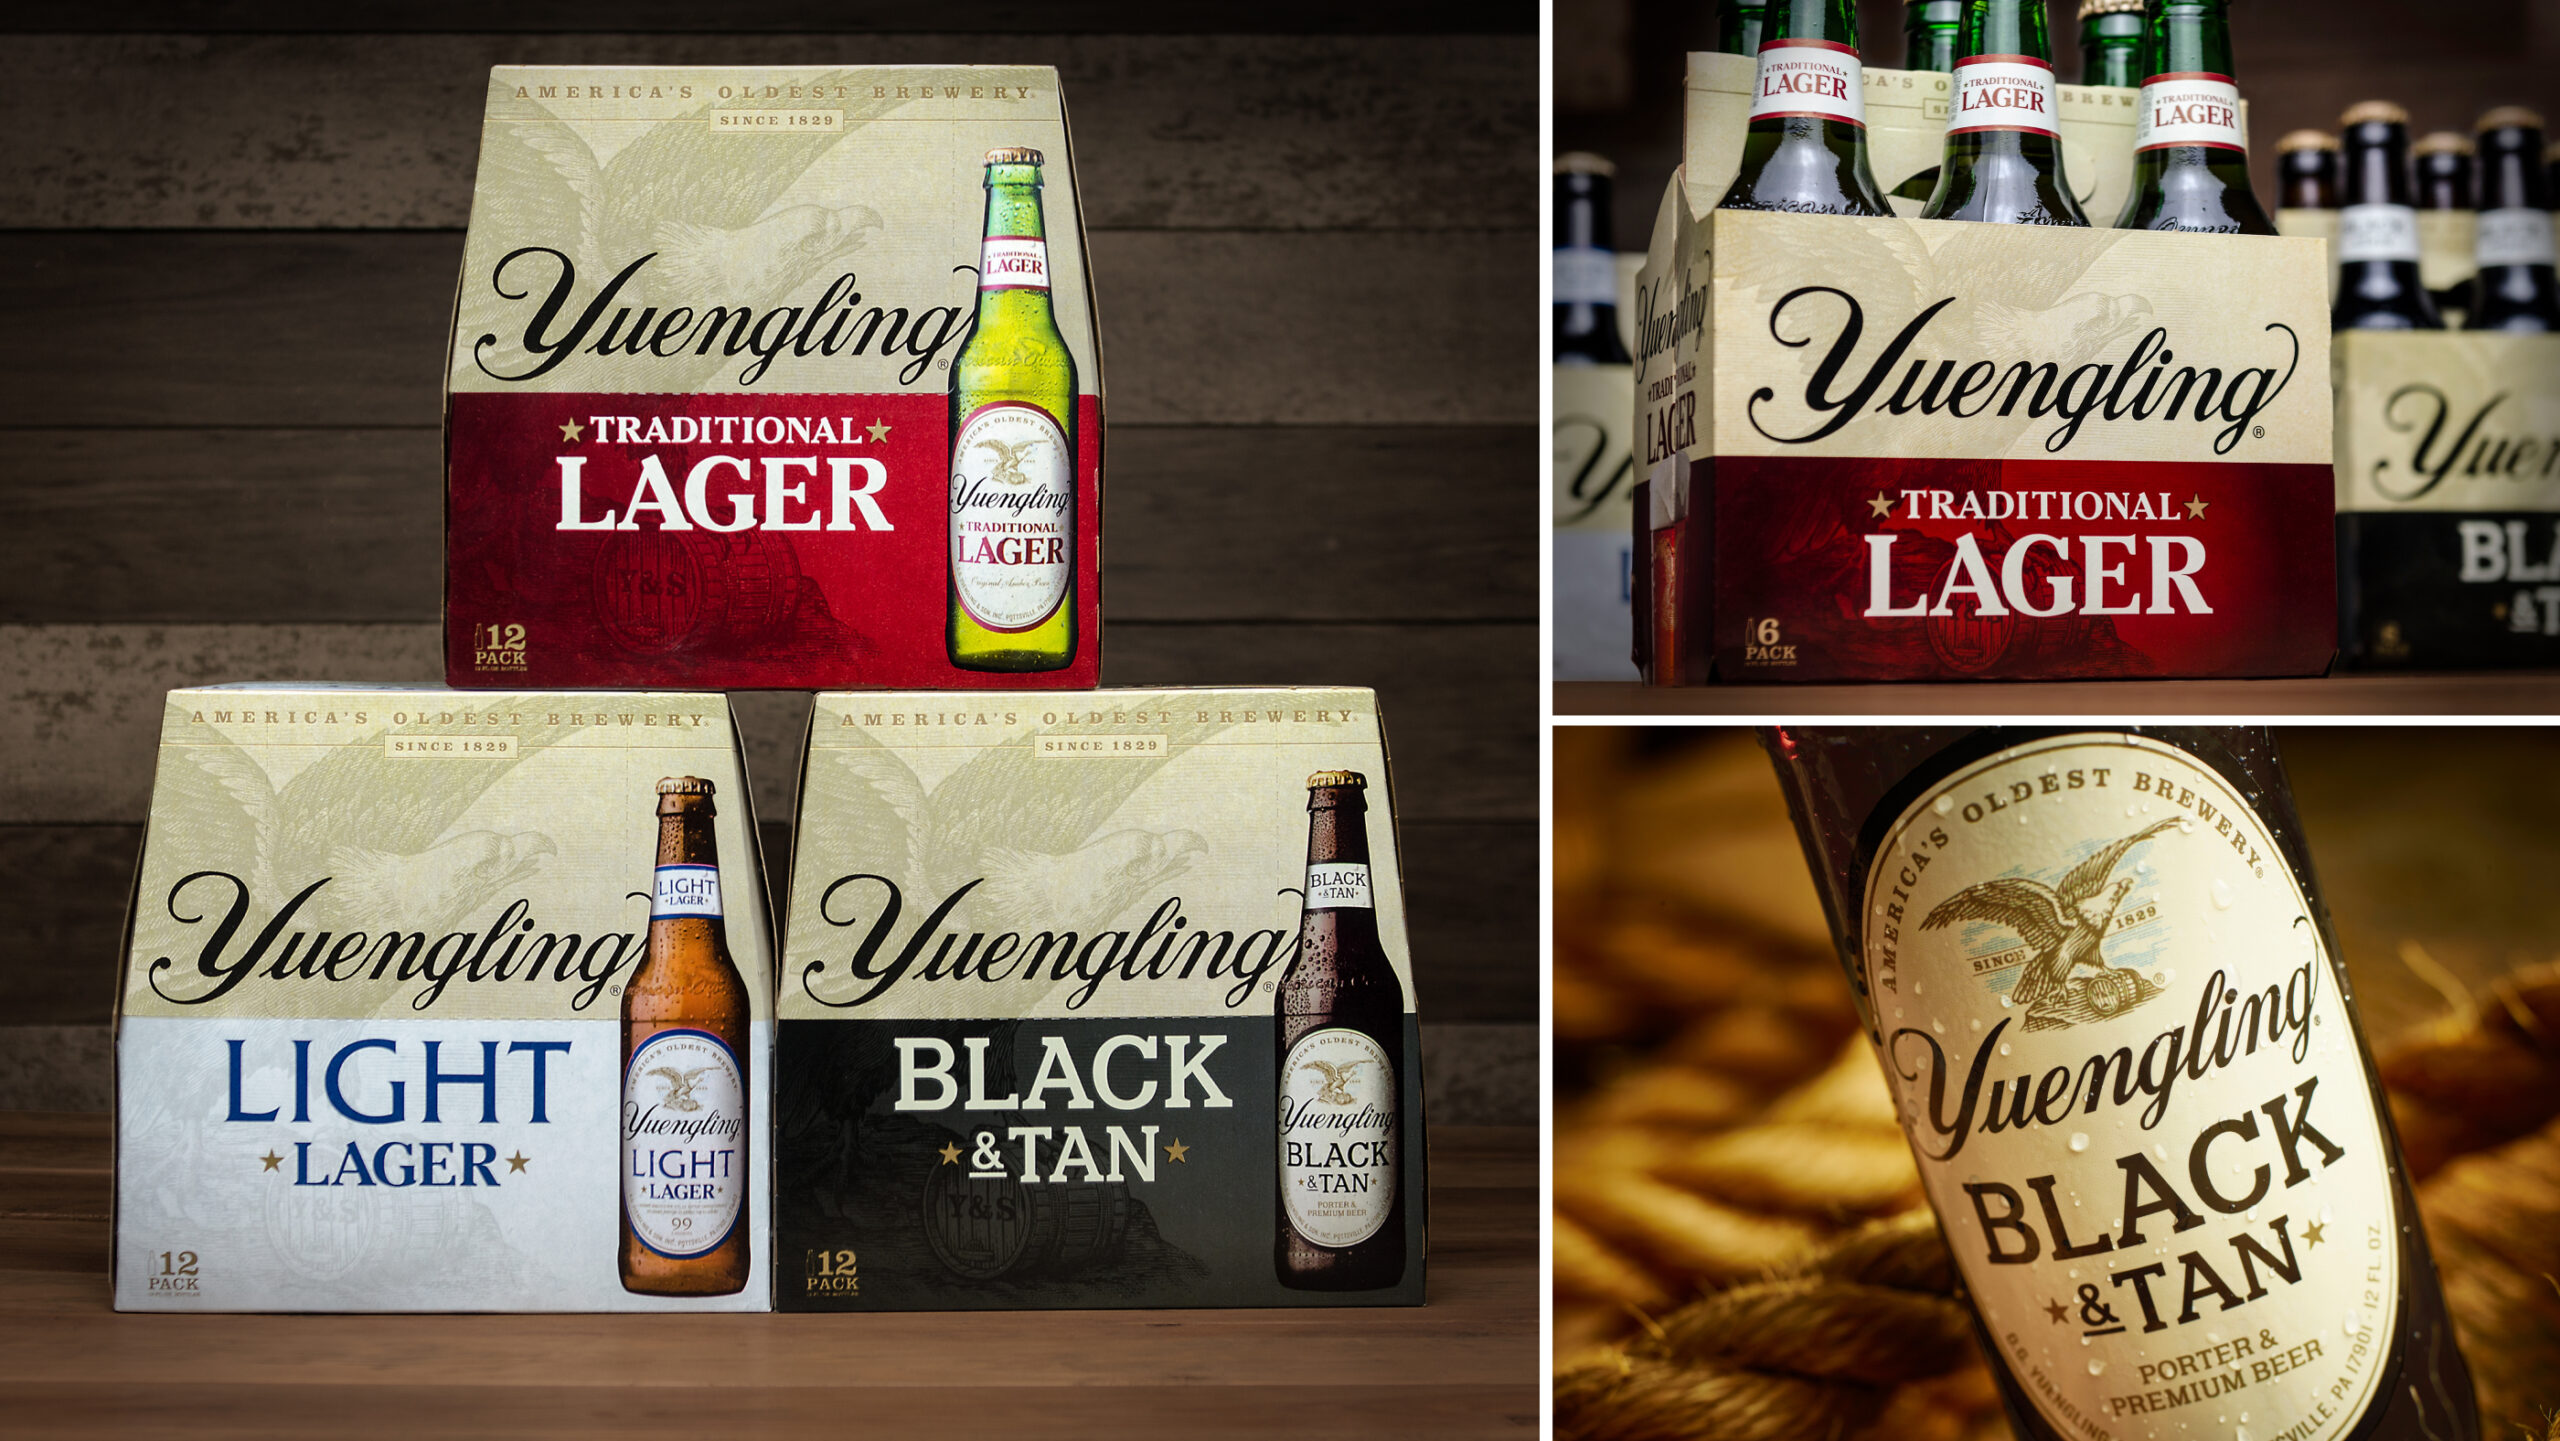 bailey-brand-consulting-yuengling-full-width-images-grid-packaging